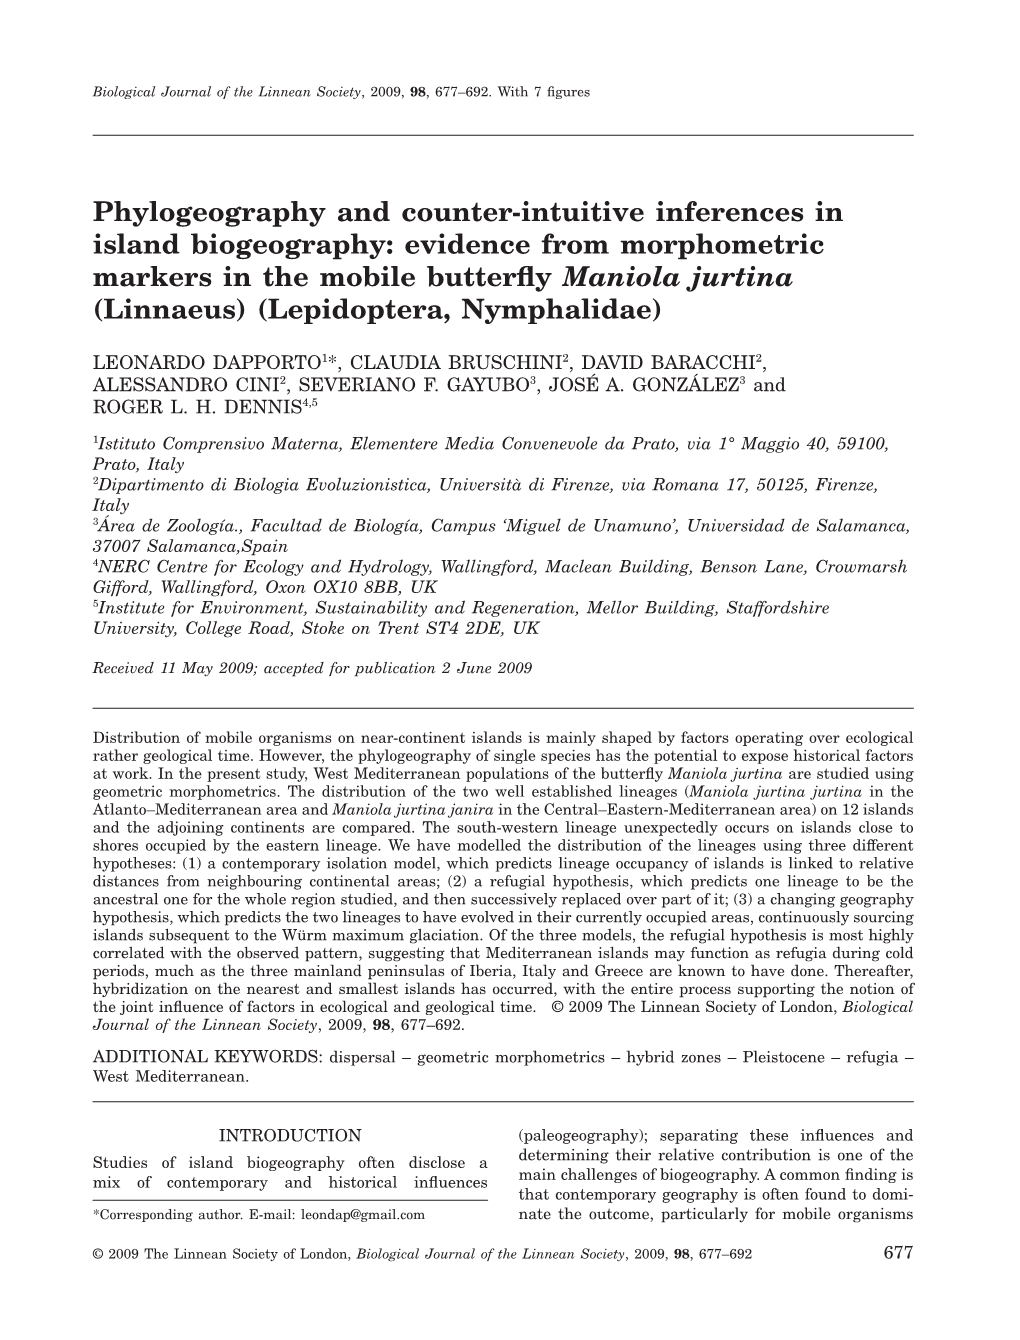 Phylogeography and Counter-Intuitive Inferences in Island